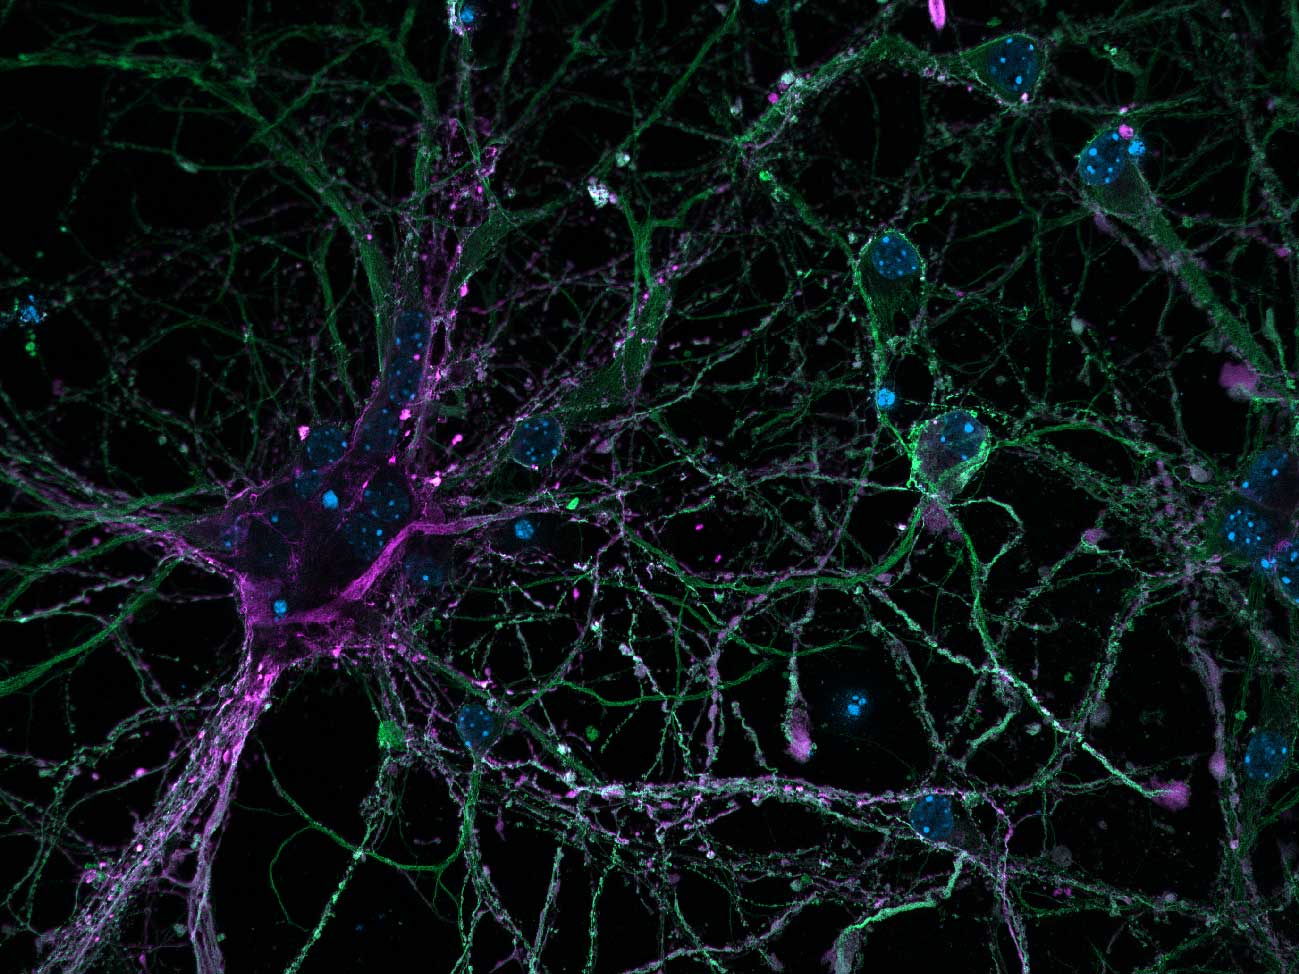 Cortical neurons stained for DNA, microtubules and microtubule-associated proteins 